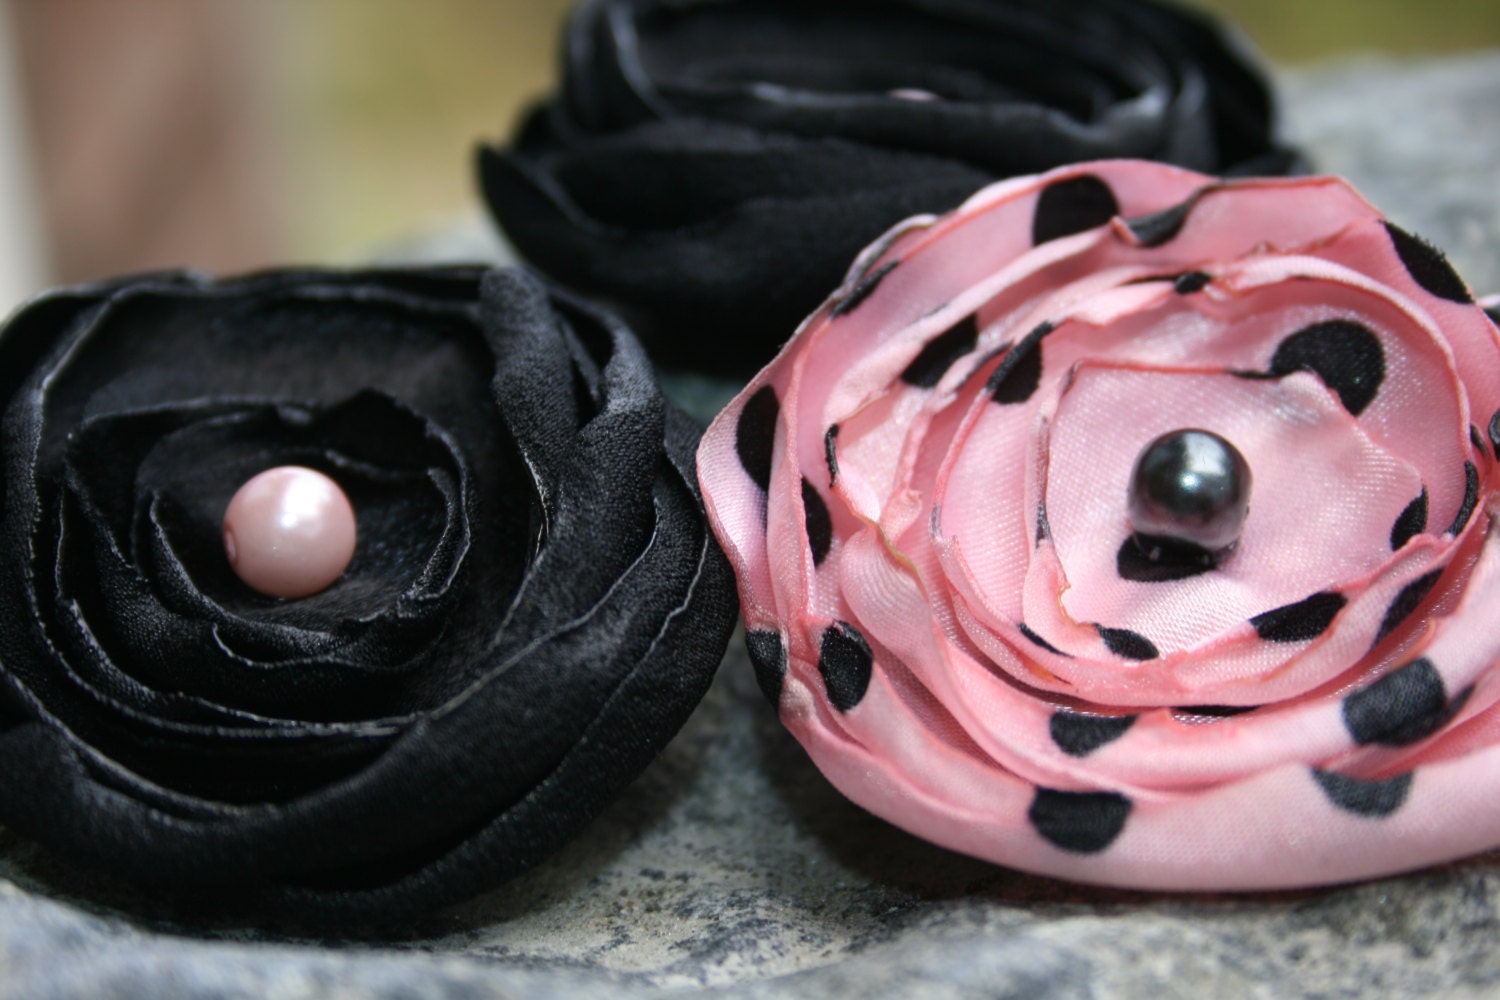 Satin hair flowers, polka dot flowers, headband flowers, photo prop, pin up girl flowers, pink and black hair flower, pageant hair clips. - RockabillyBabyPlace